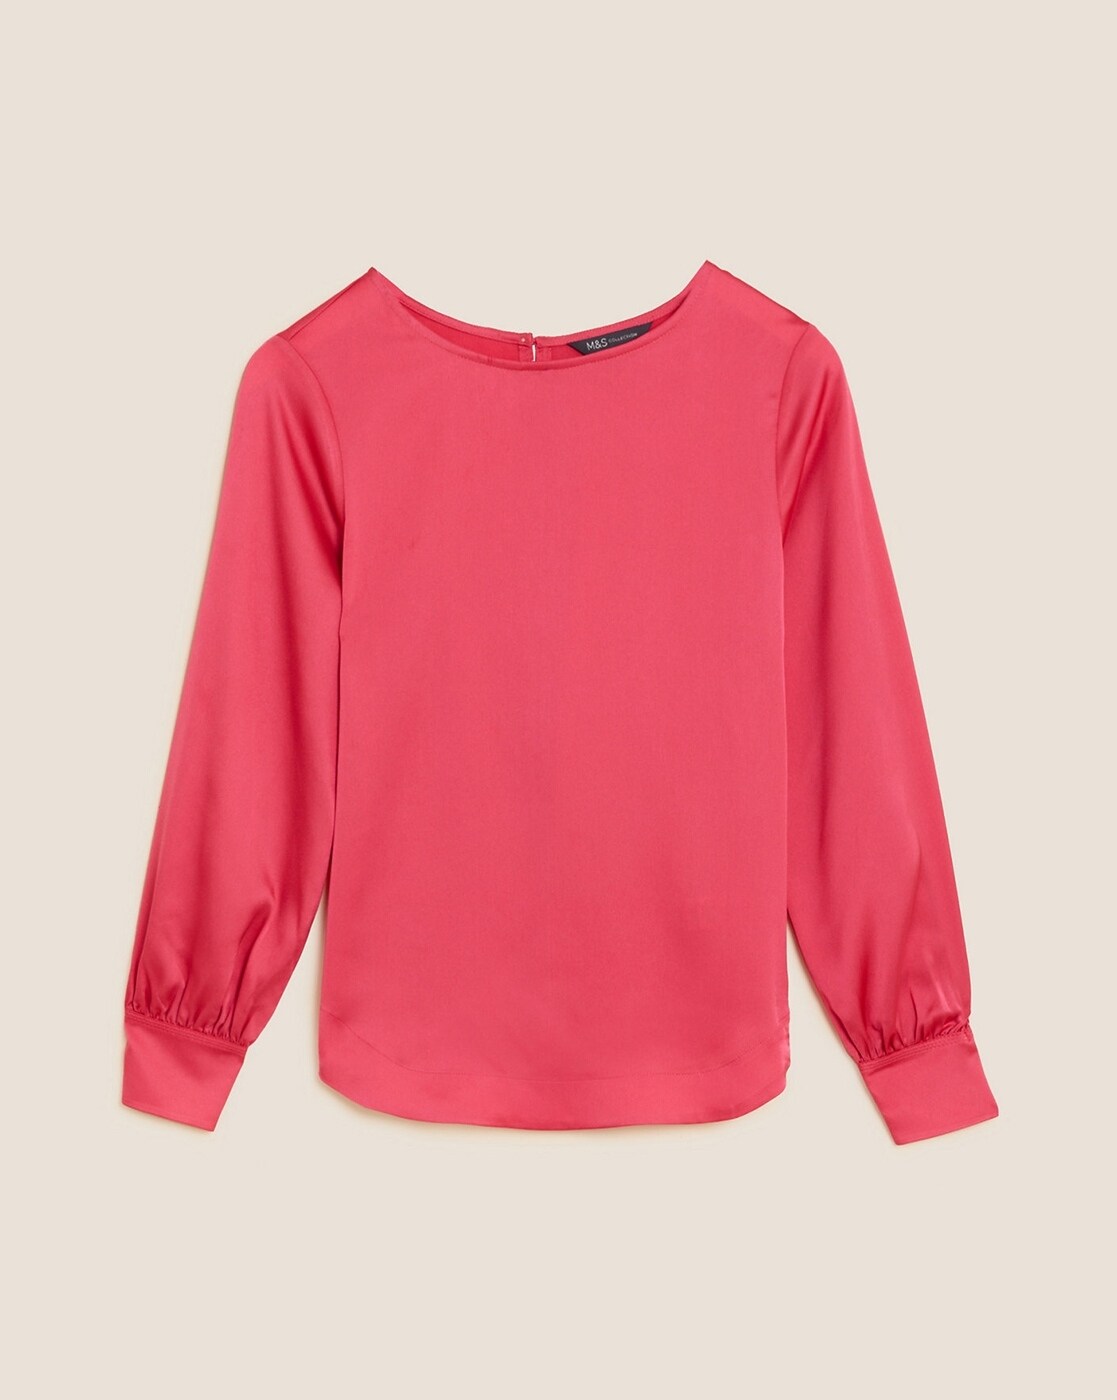 Brushed Jacquard Long Sleeve Top, M&S Collection